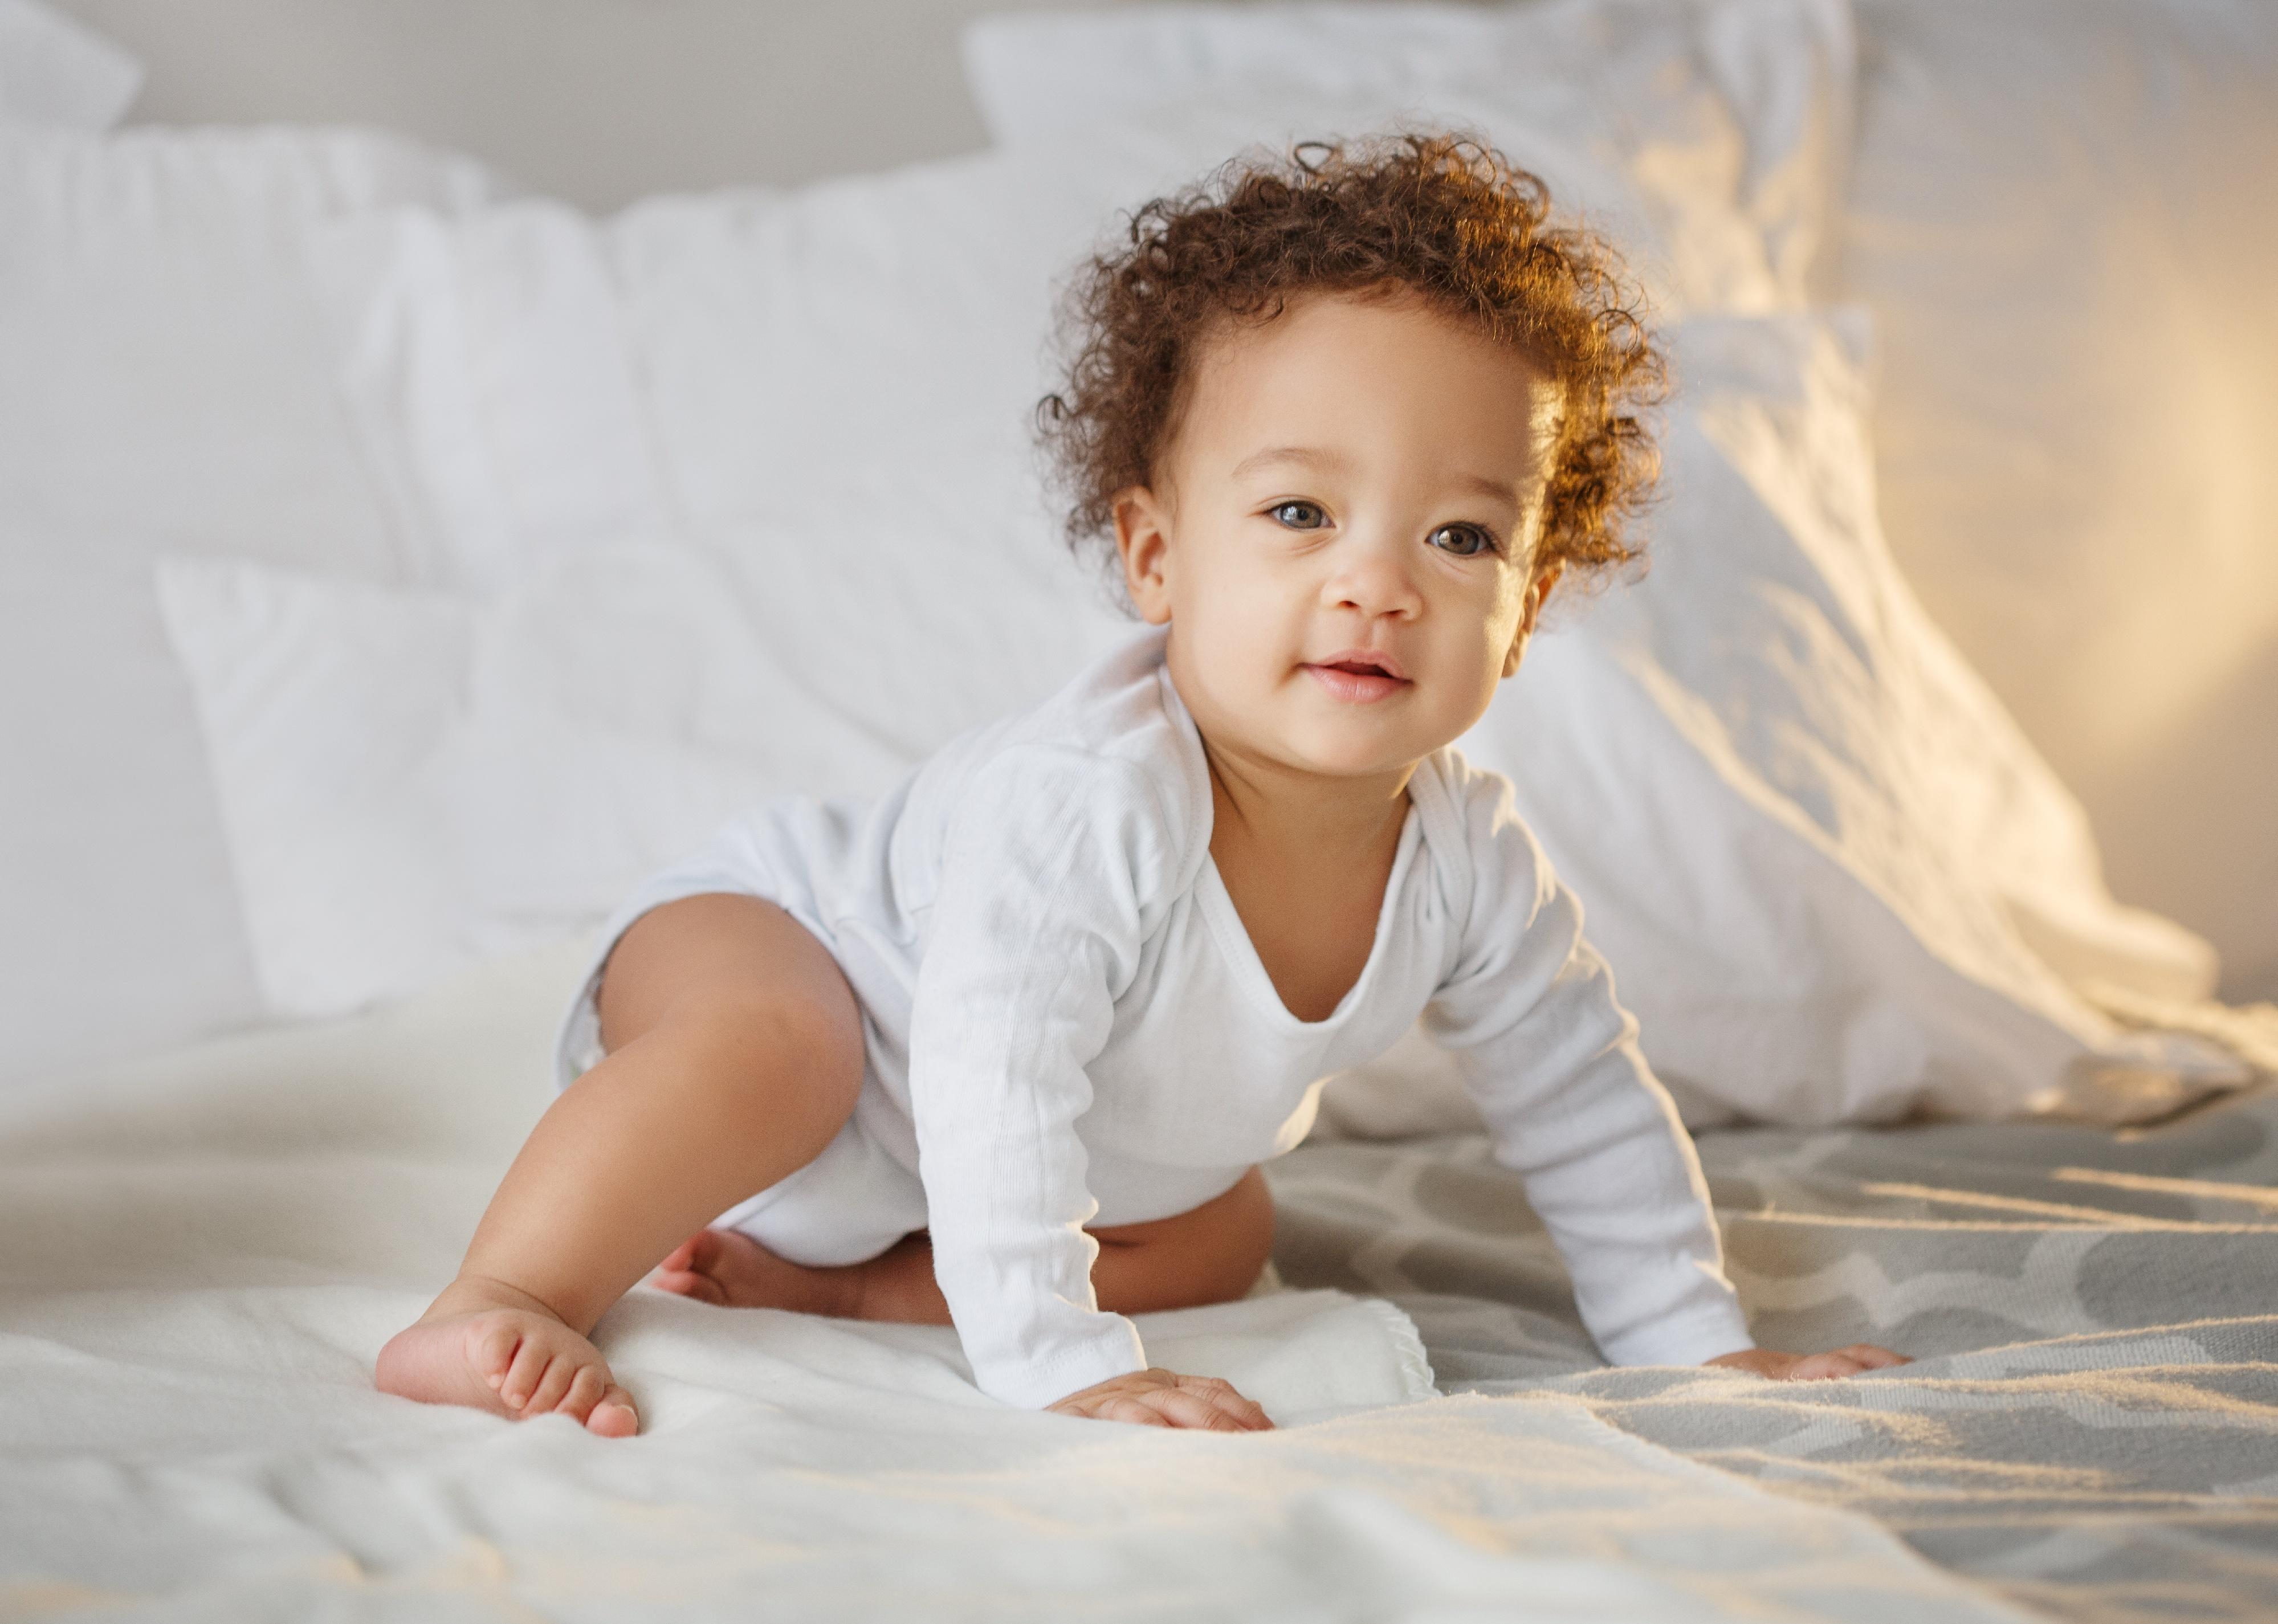 Baby with curly hair sitting up in bed.